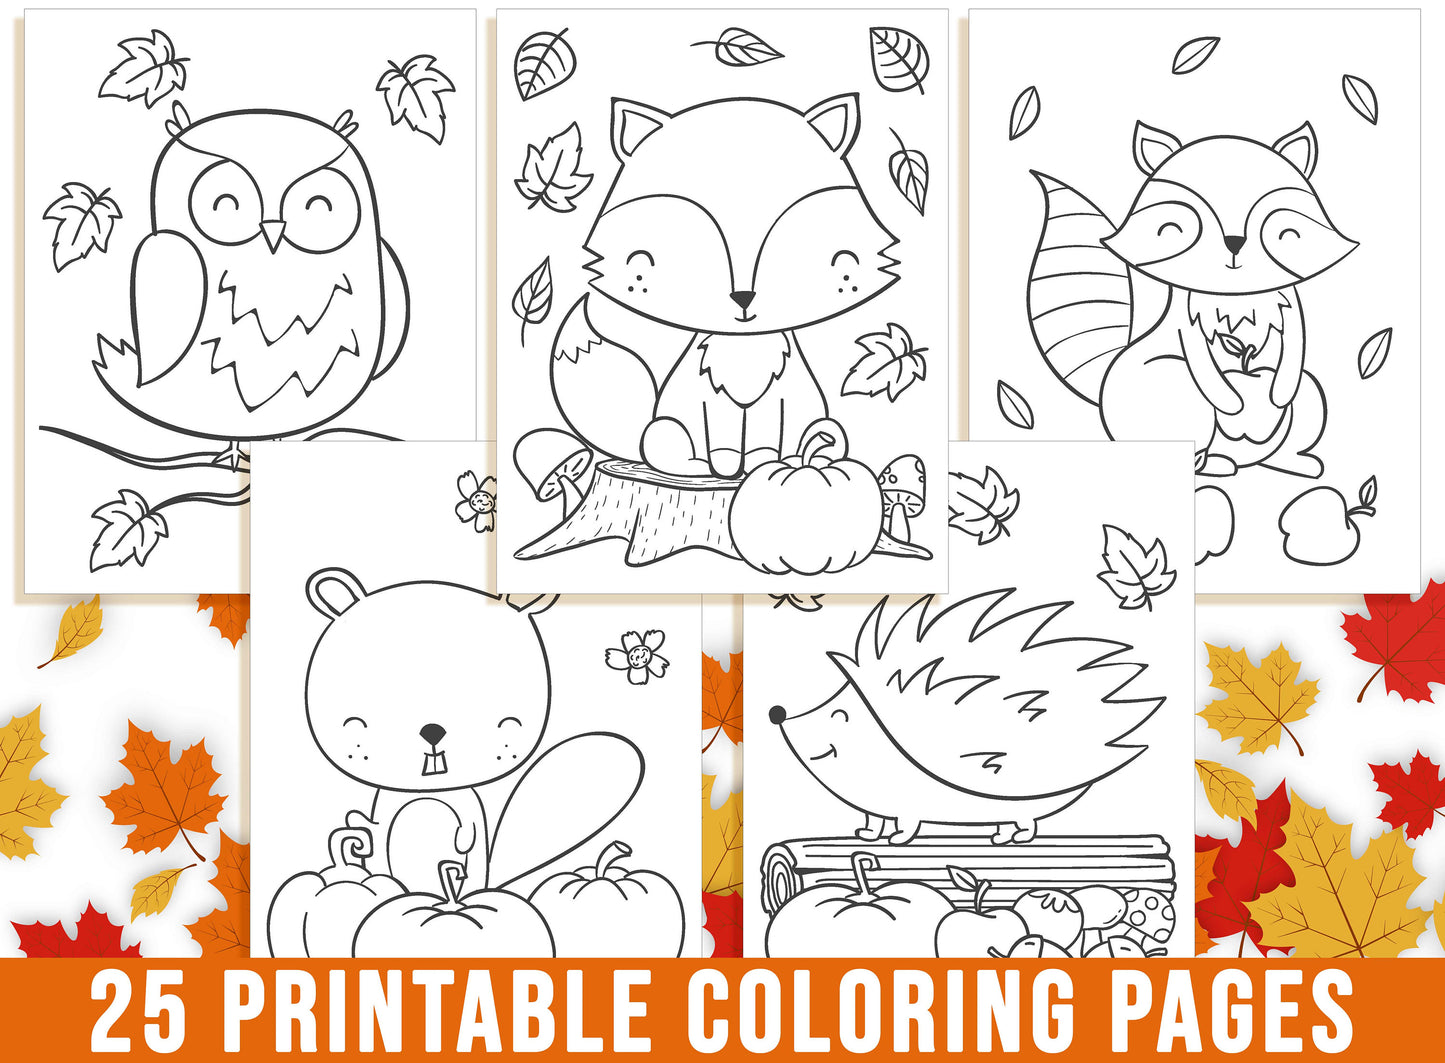 Fall Coloring Pages, Autumn Coloring Book for Kids, Fall Leaf, Fall Flower, Pumpkin, Fox, Oak, Owl, Squirrels, Deer, Bear, Thanksgiving, PDF